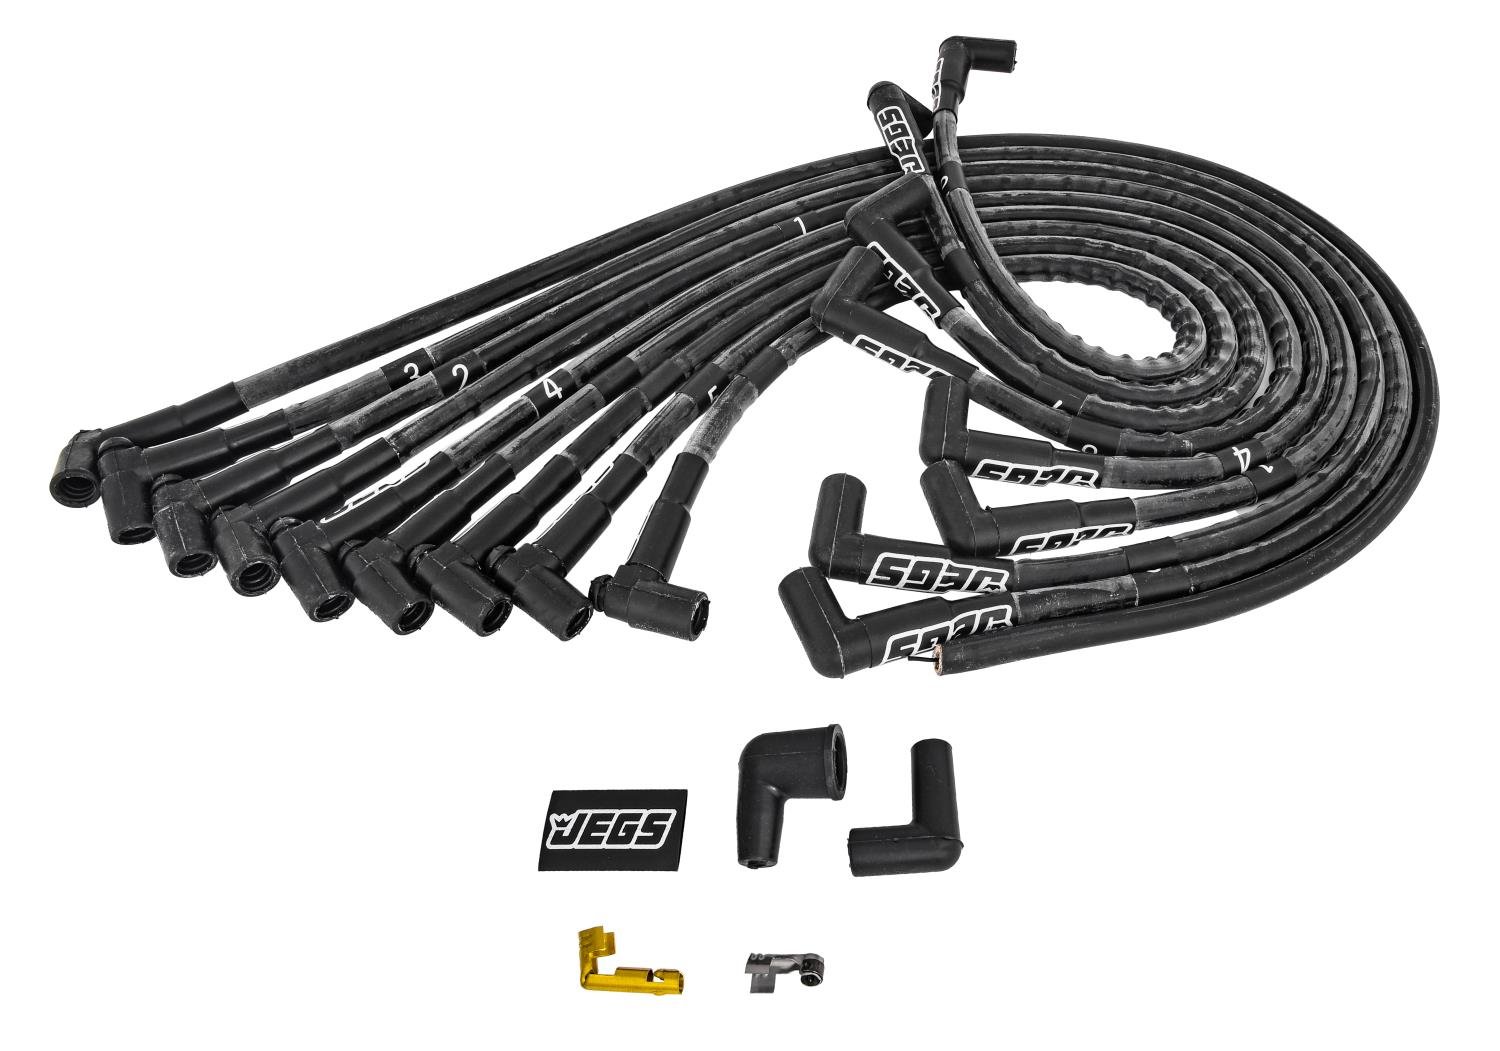 8mm Hi-Temp Sleeved Spark Plug Wire Set for Small Block Chevy 262-400 w/HEI, Over Valve Cover w/90-degree Boots [Black]